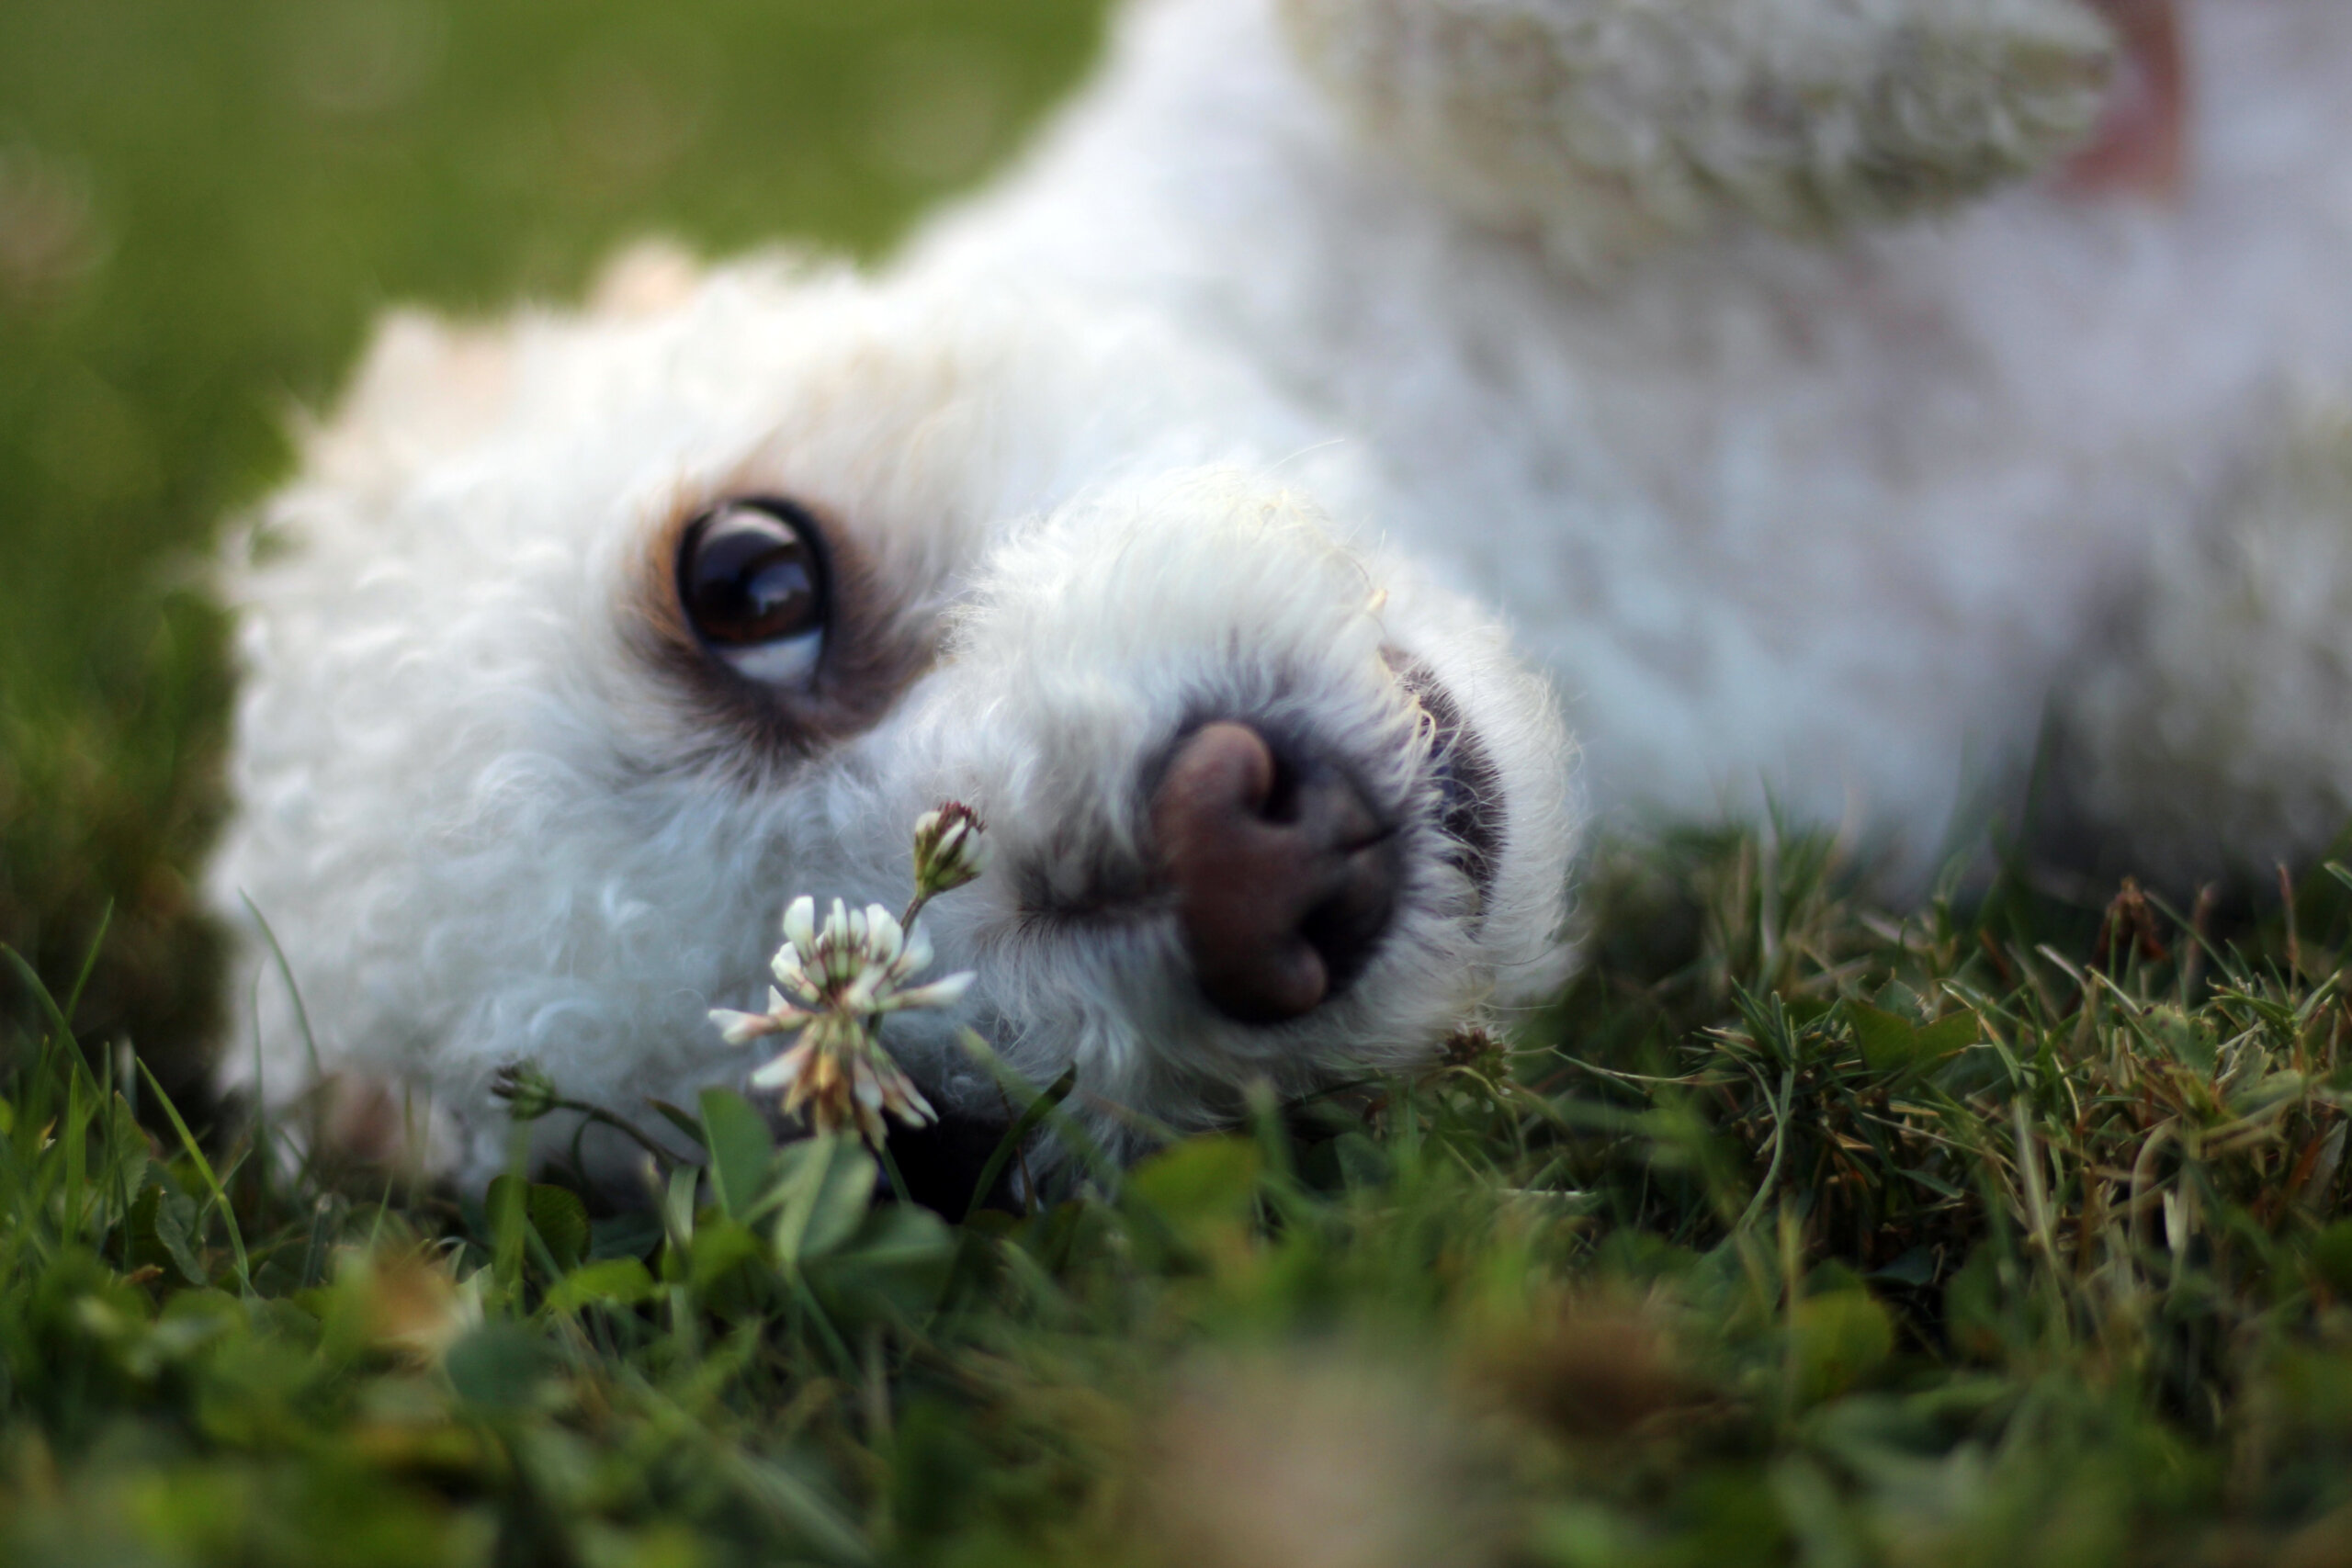 Sparrow bichon dog lying in the grass